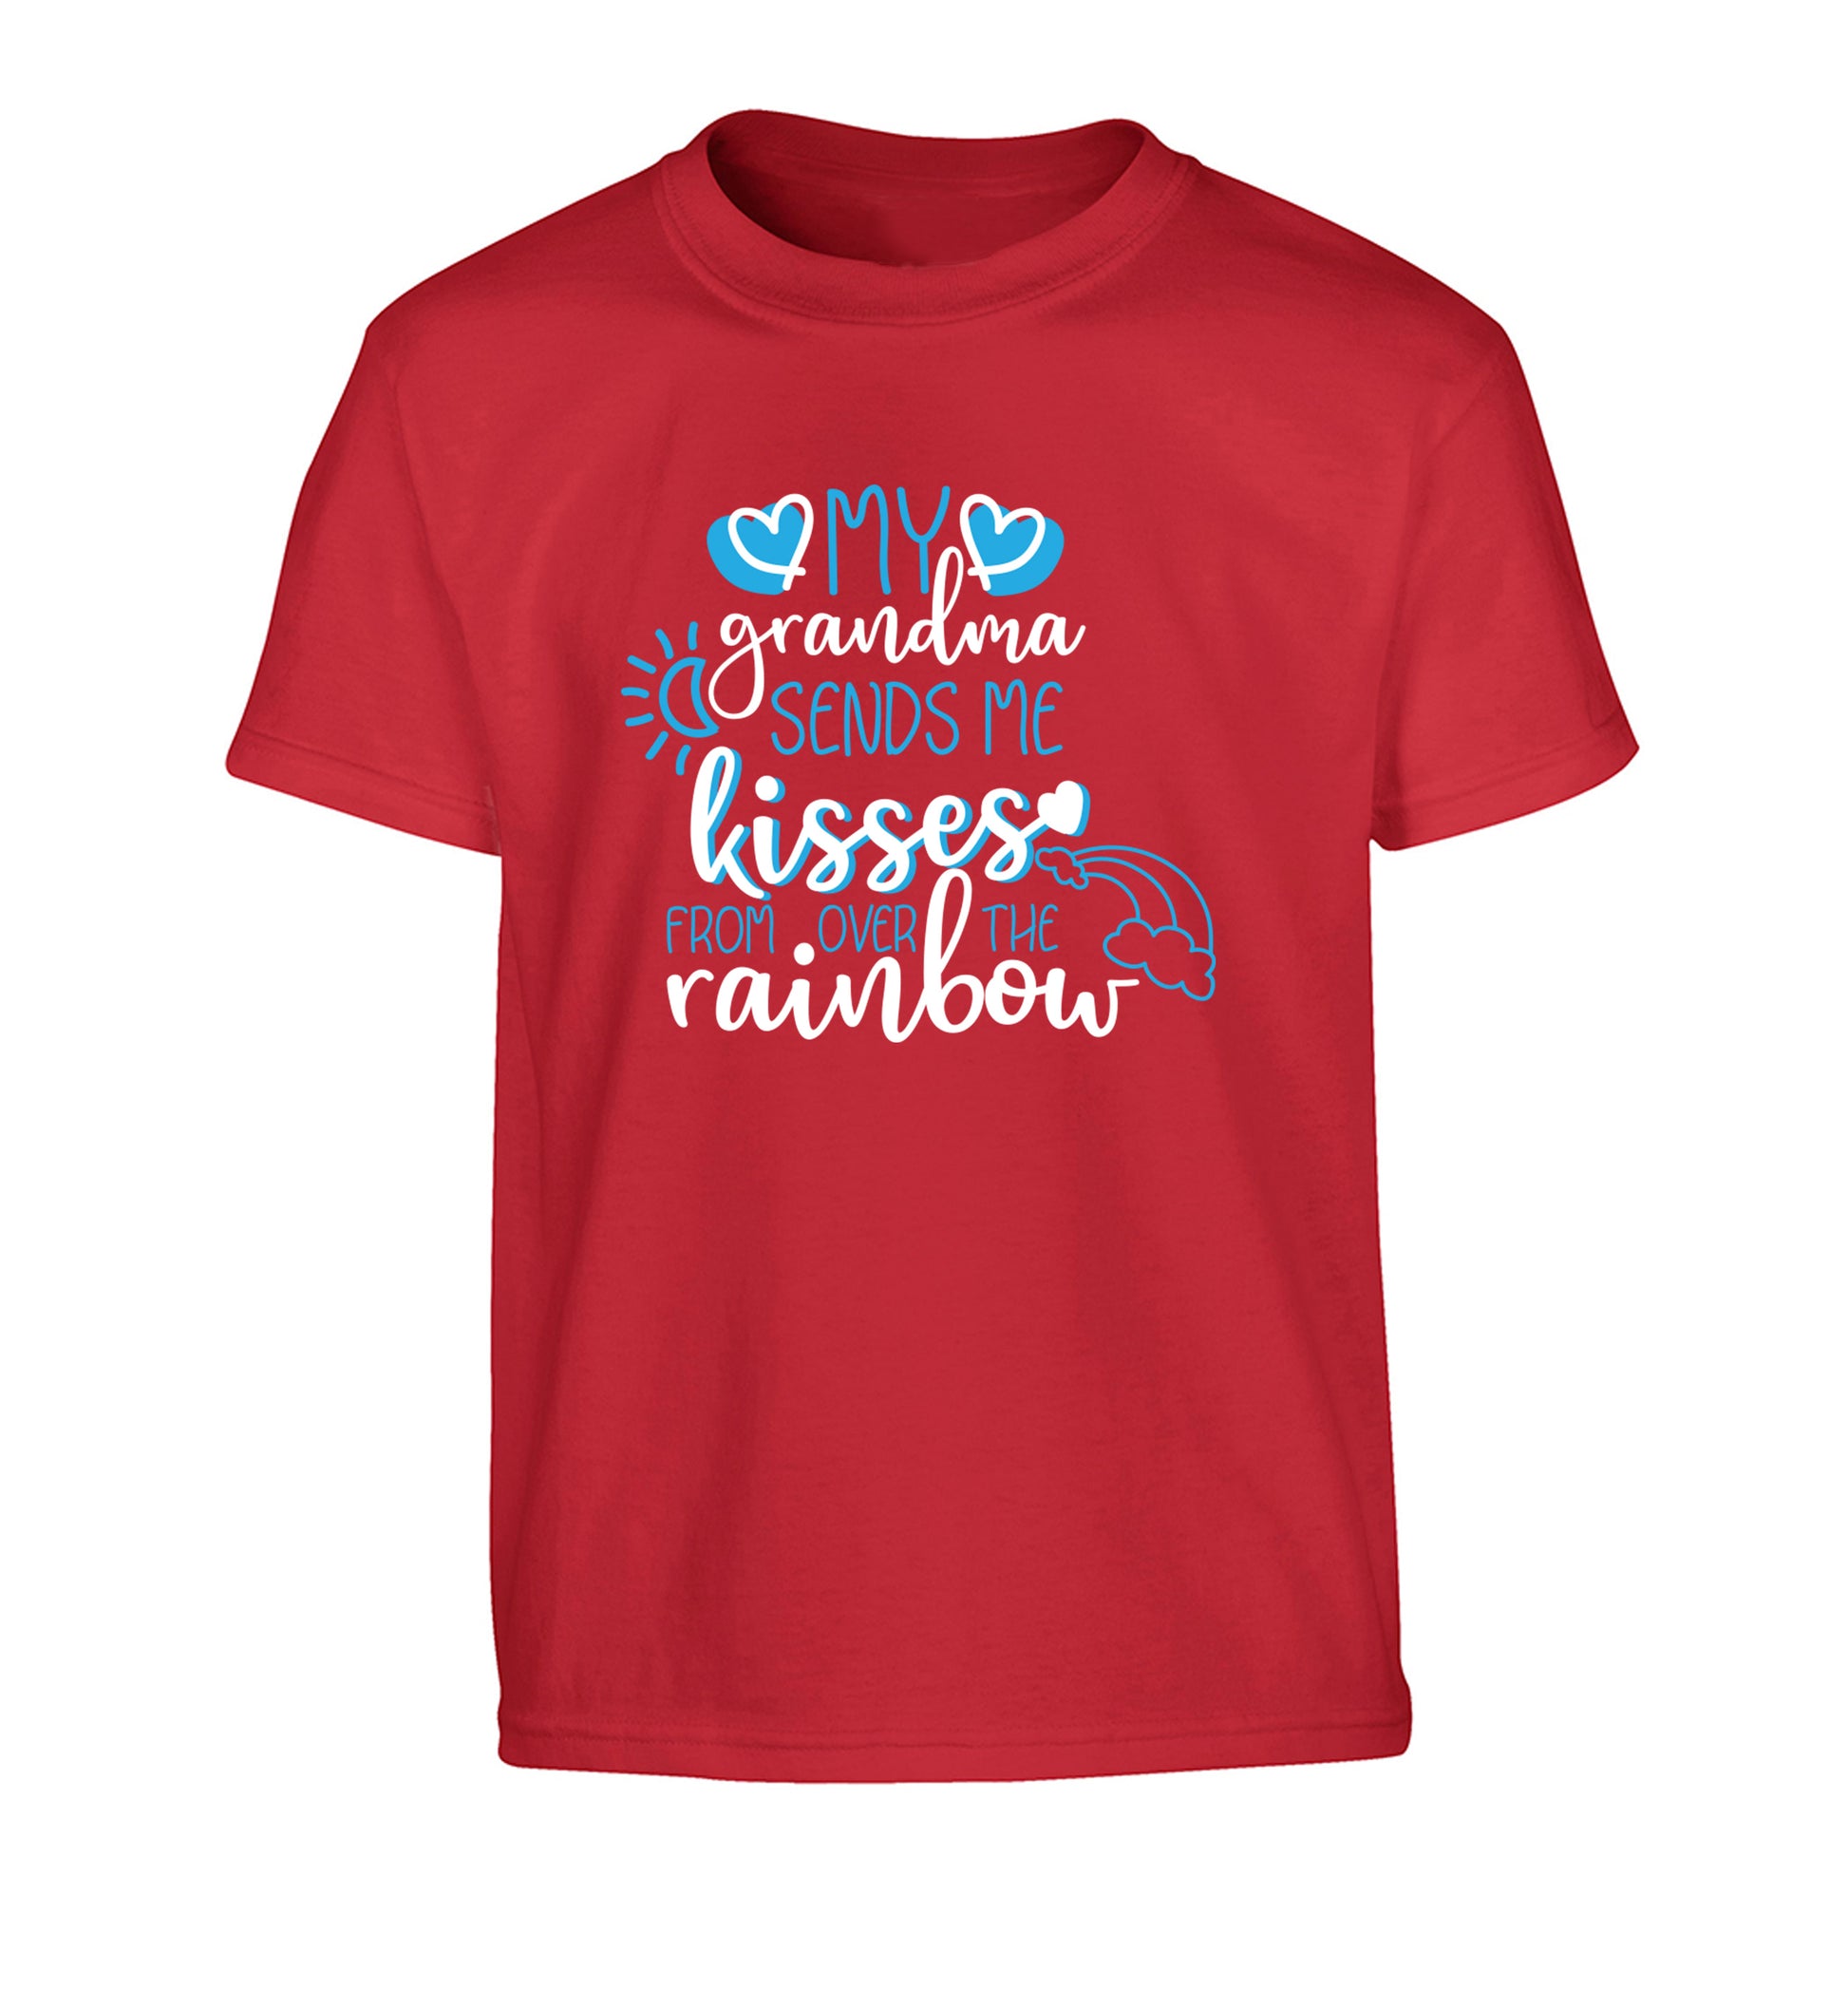 My grandma sends me kisses from over the rainbow Children's red Tshirt 12-13 Years